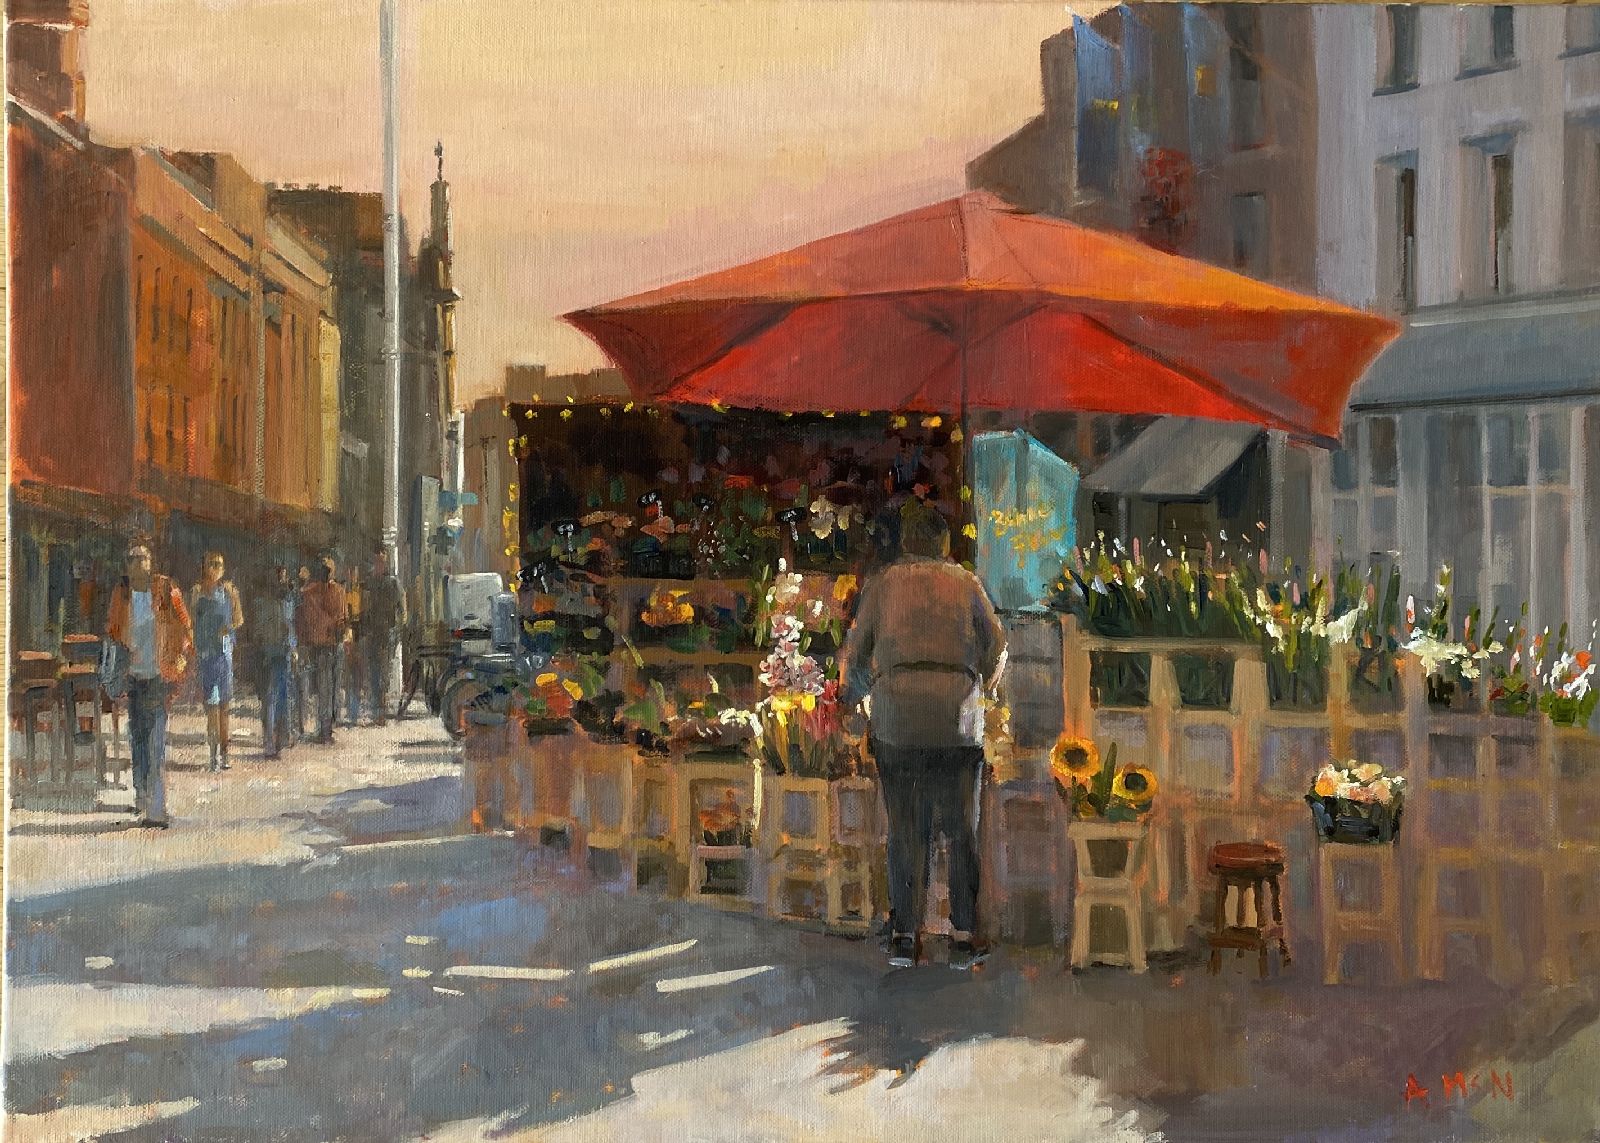 The flower seller by Anne Mc Nulty